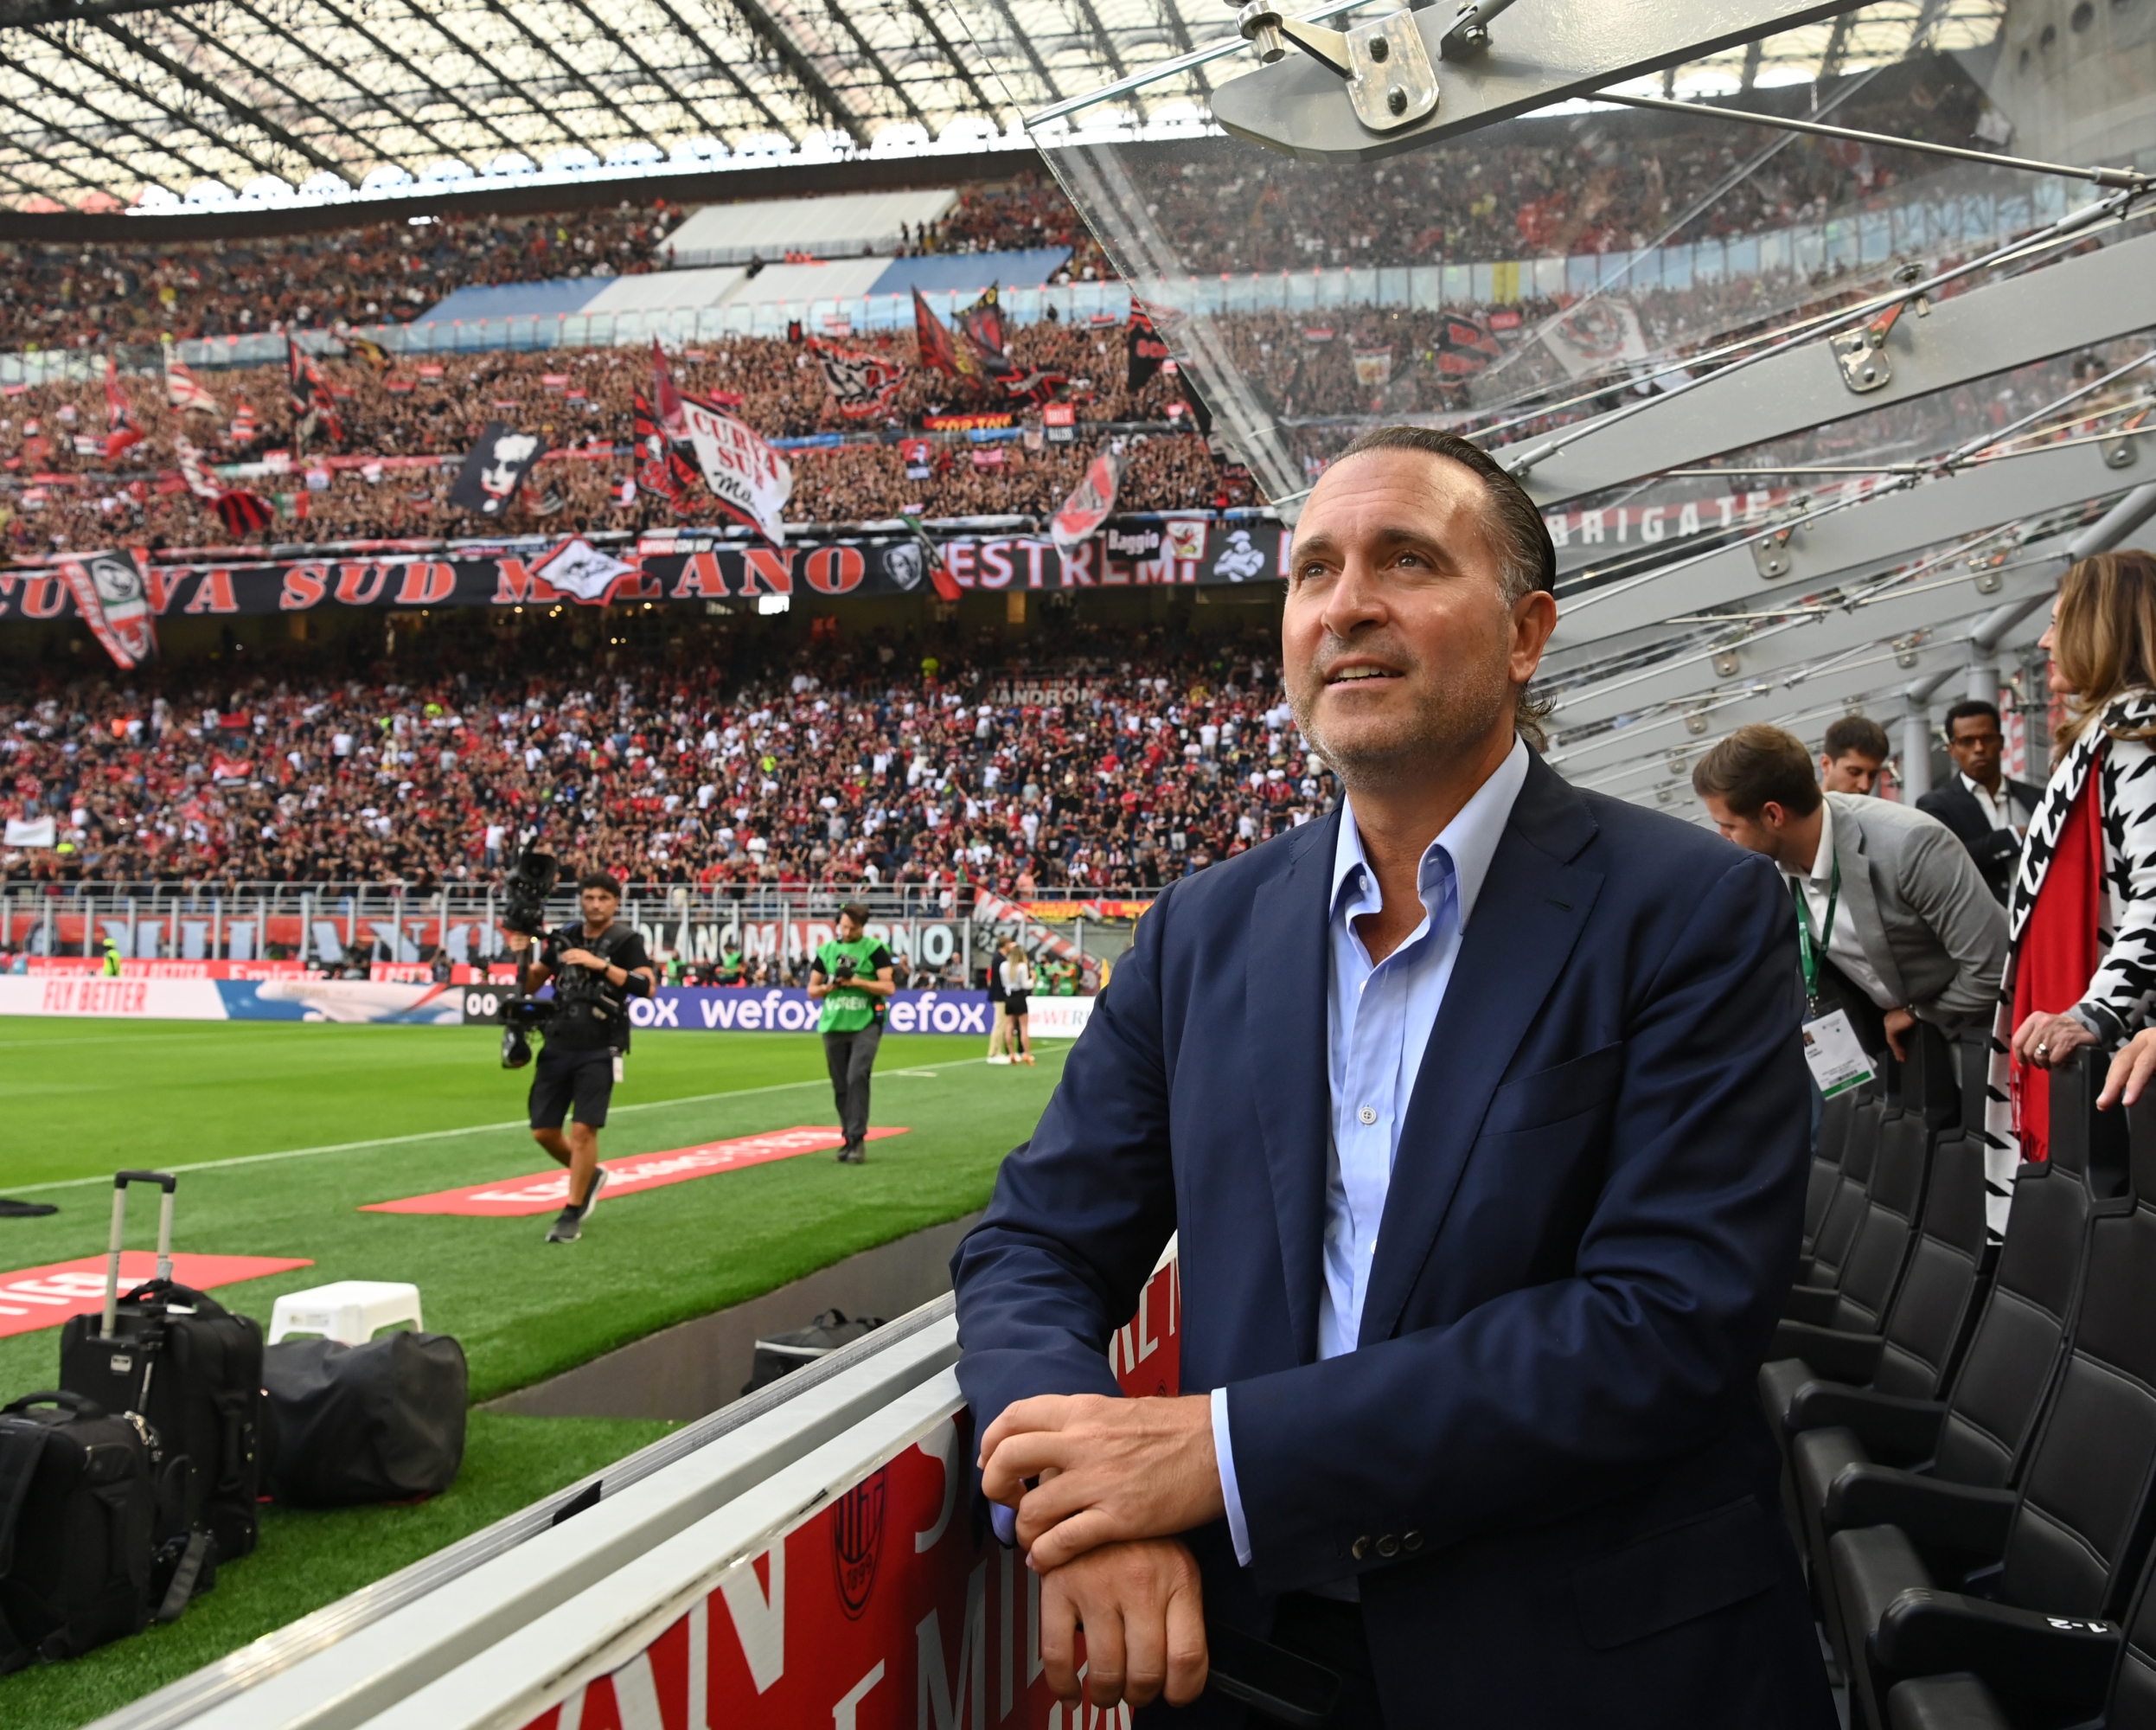 MILAN, ITALY - SEPTEMBER 03: Founder & Managing Partner at RedBird Capital Partners Gerry Cardinale looks on prior to the Serie A match between AC Milan and FC Internazionale at Stadio Giuseppe Meazza on September 03, 2022 in Milan, Italy. (Photo by Claudio Villa/AC Milan via Getty Images)